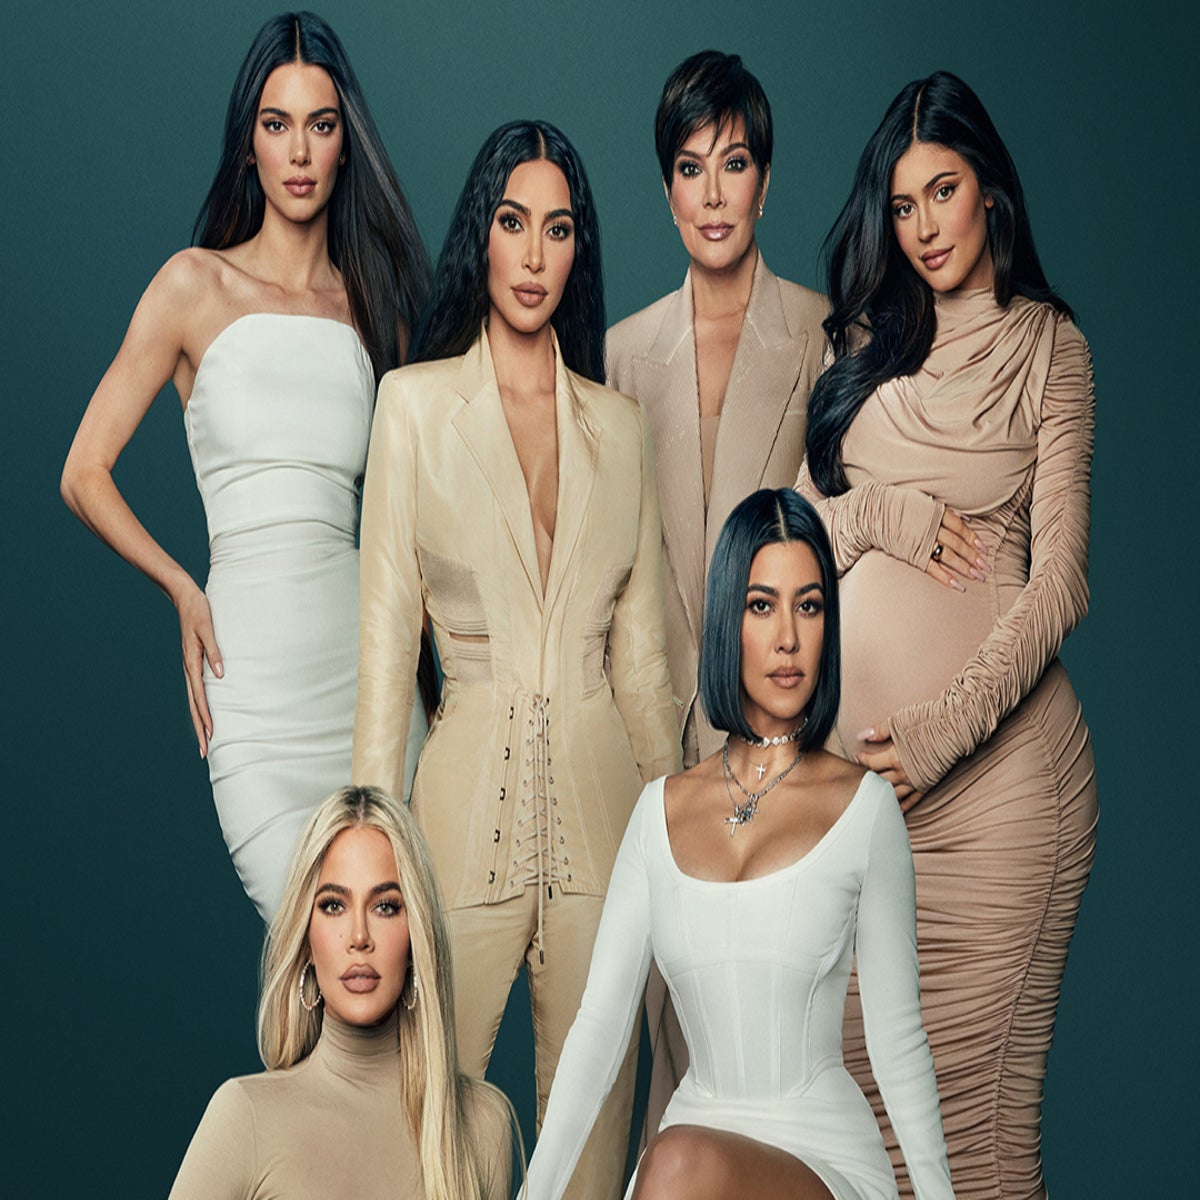 Fans Are Angry That Kim Kardashian Is Still Working With